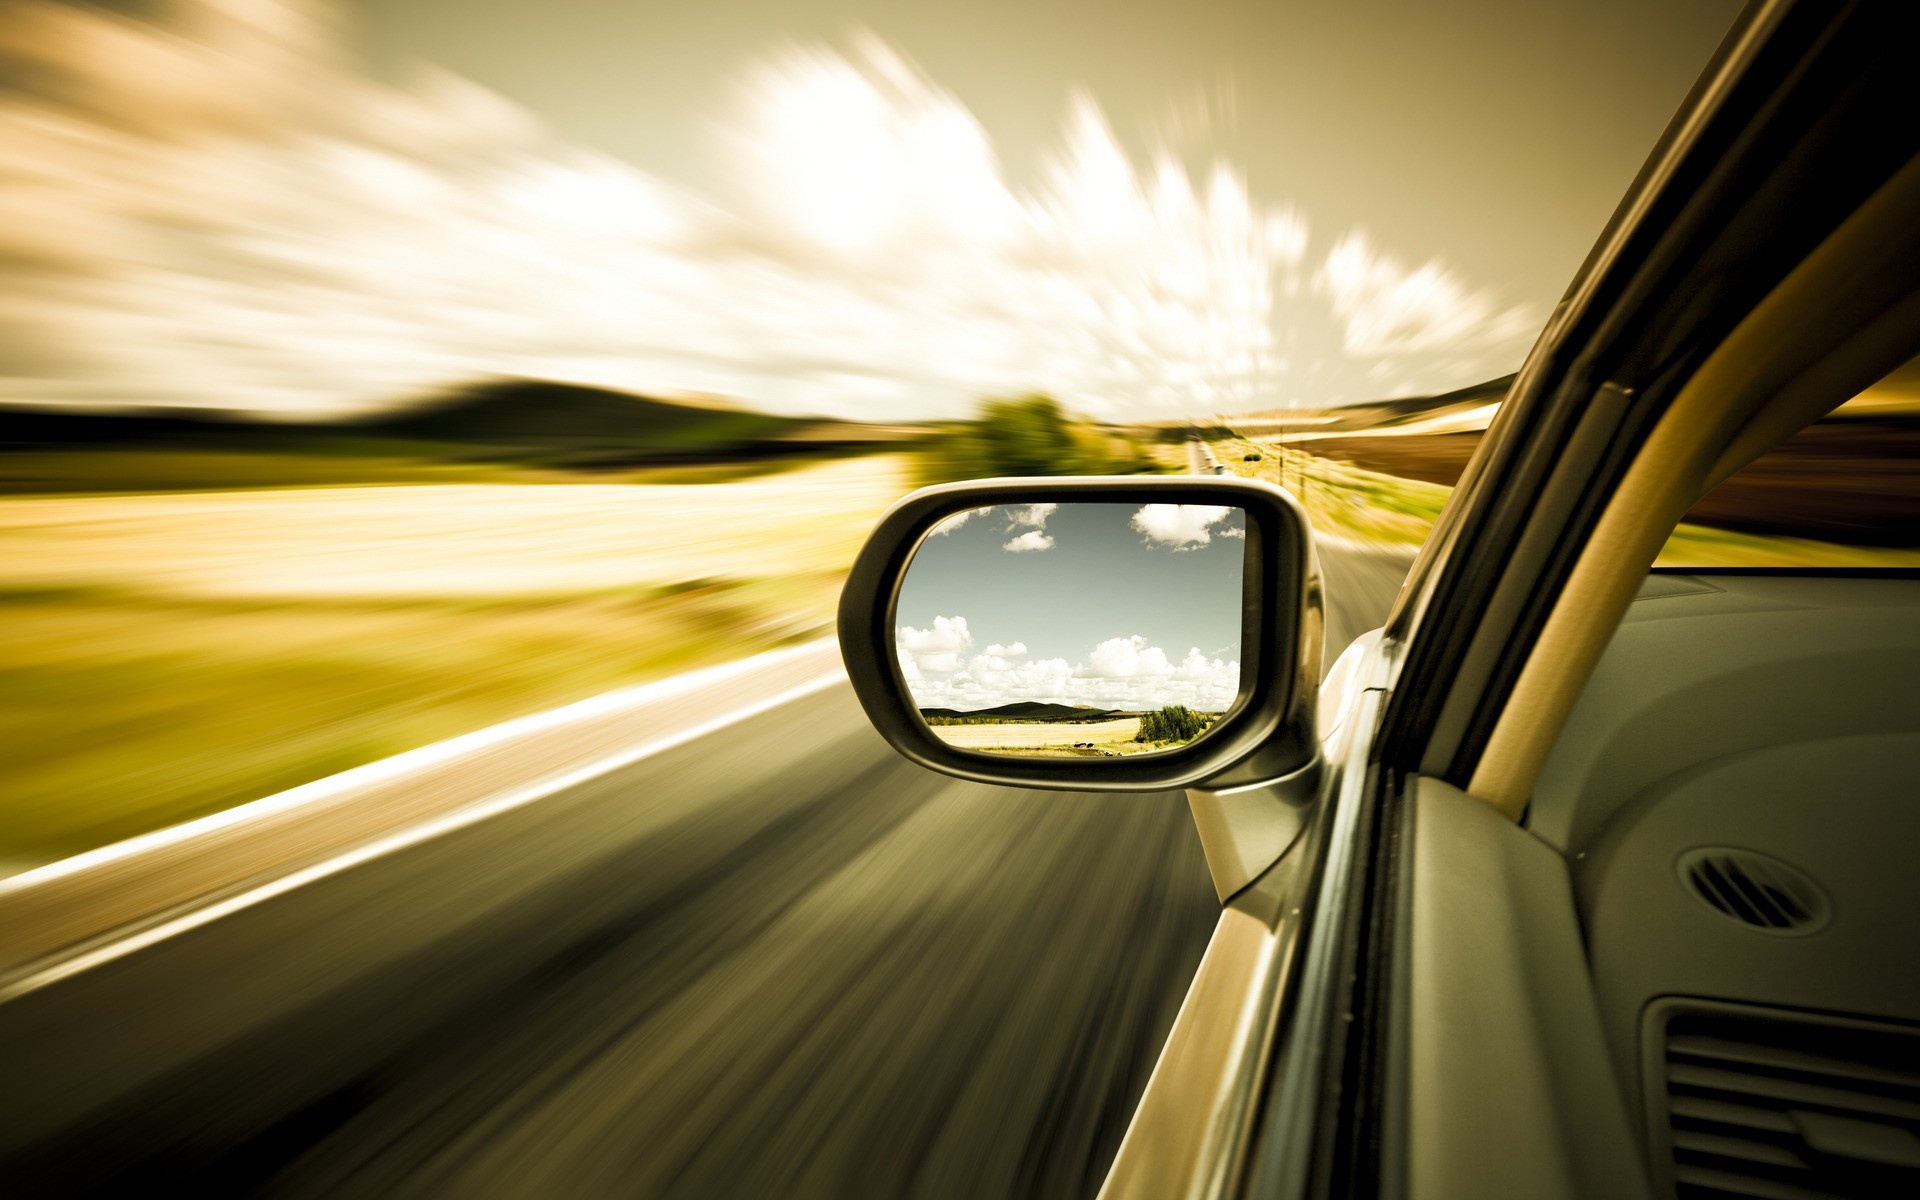 Mirror: Car, Reflection, Vehicle, Road, Long exposure, Motion, Blur, Driving, Daylight, Automobile. 1920x1200 HD Wallpaper.